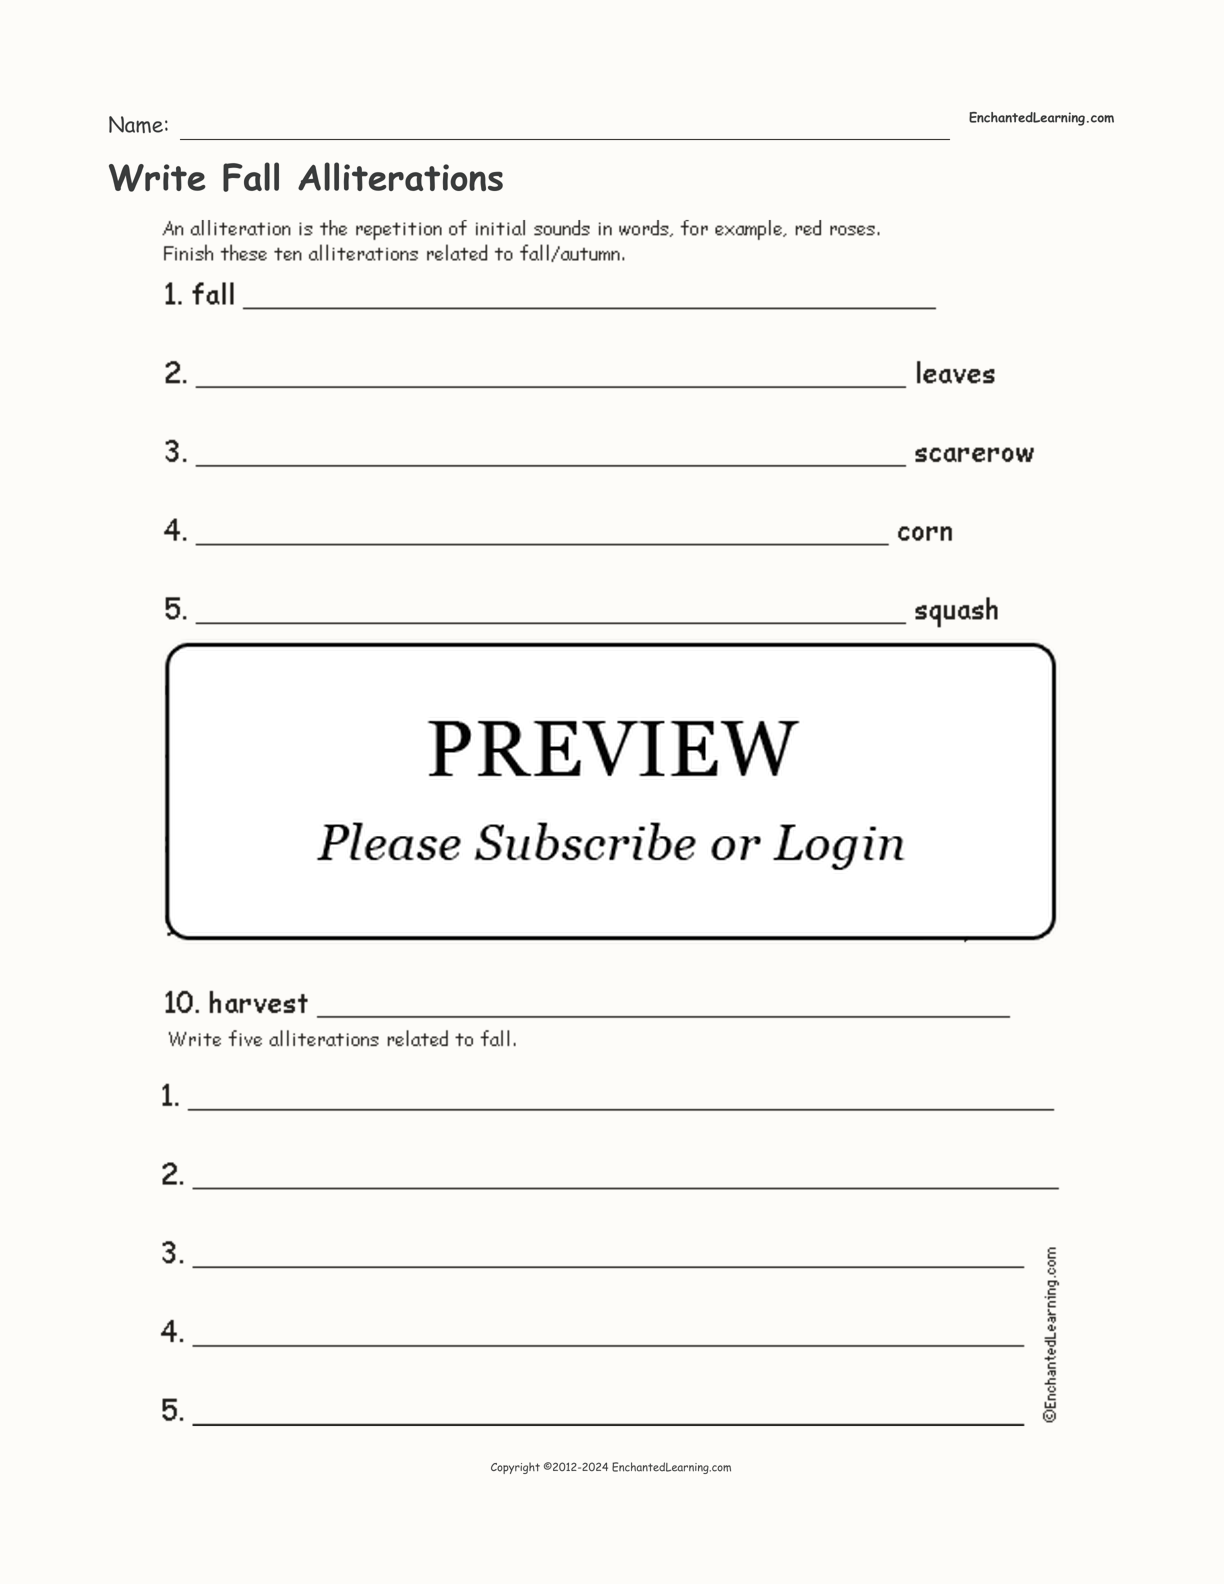 Write Fall Alliterations interactive worksheet page 1